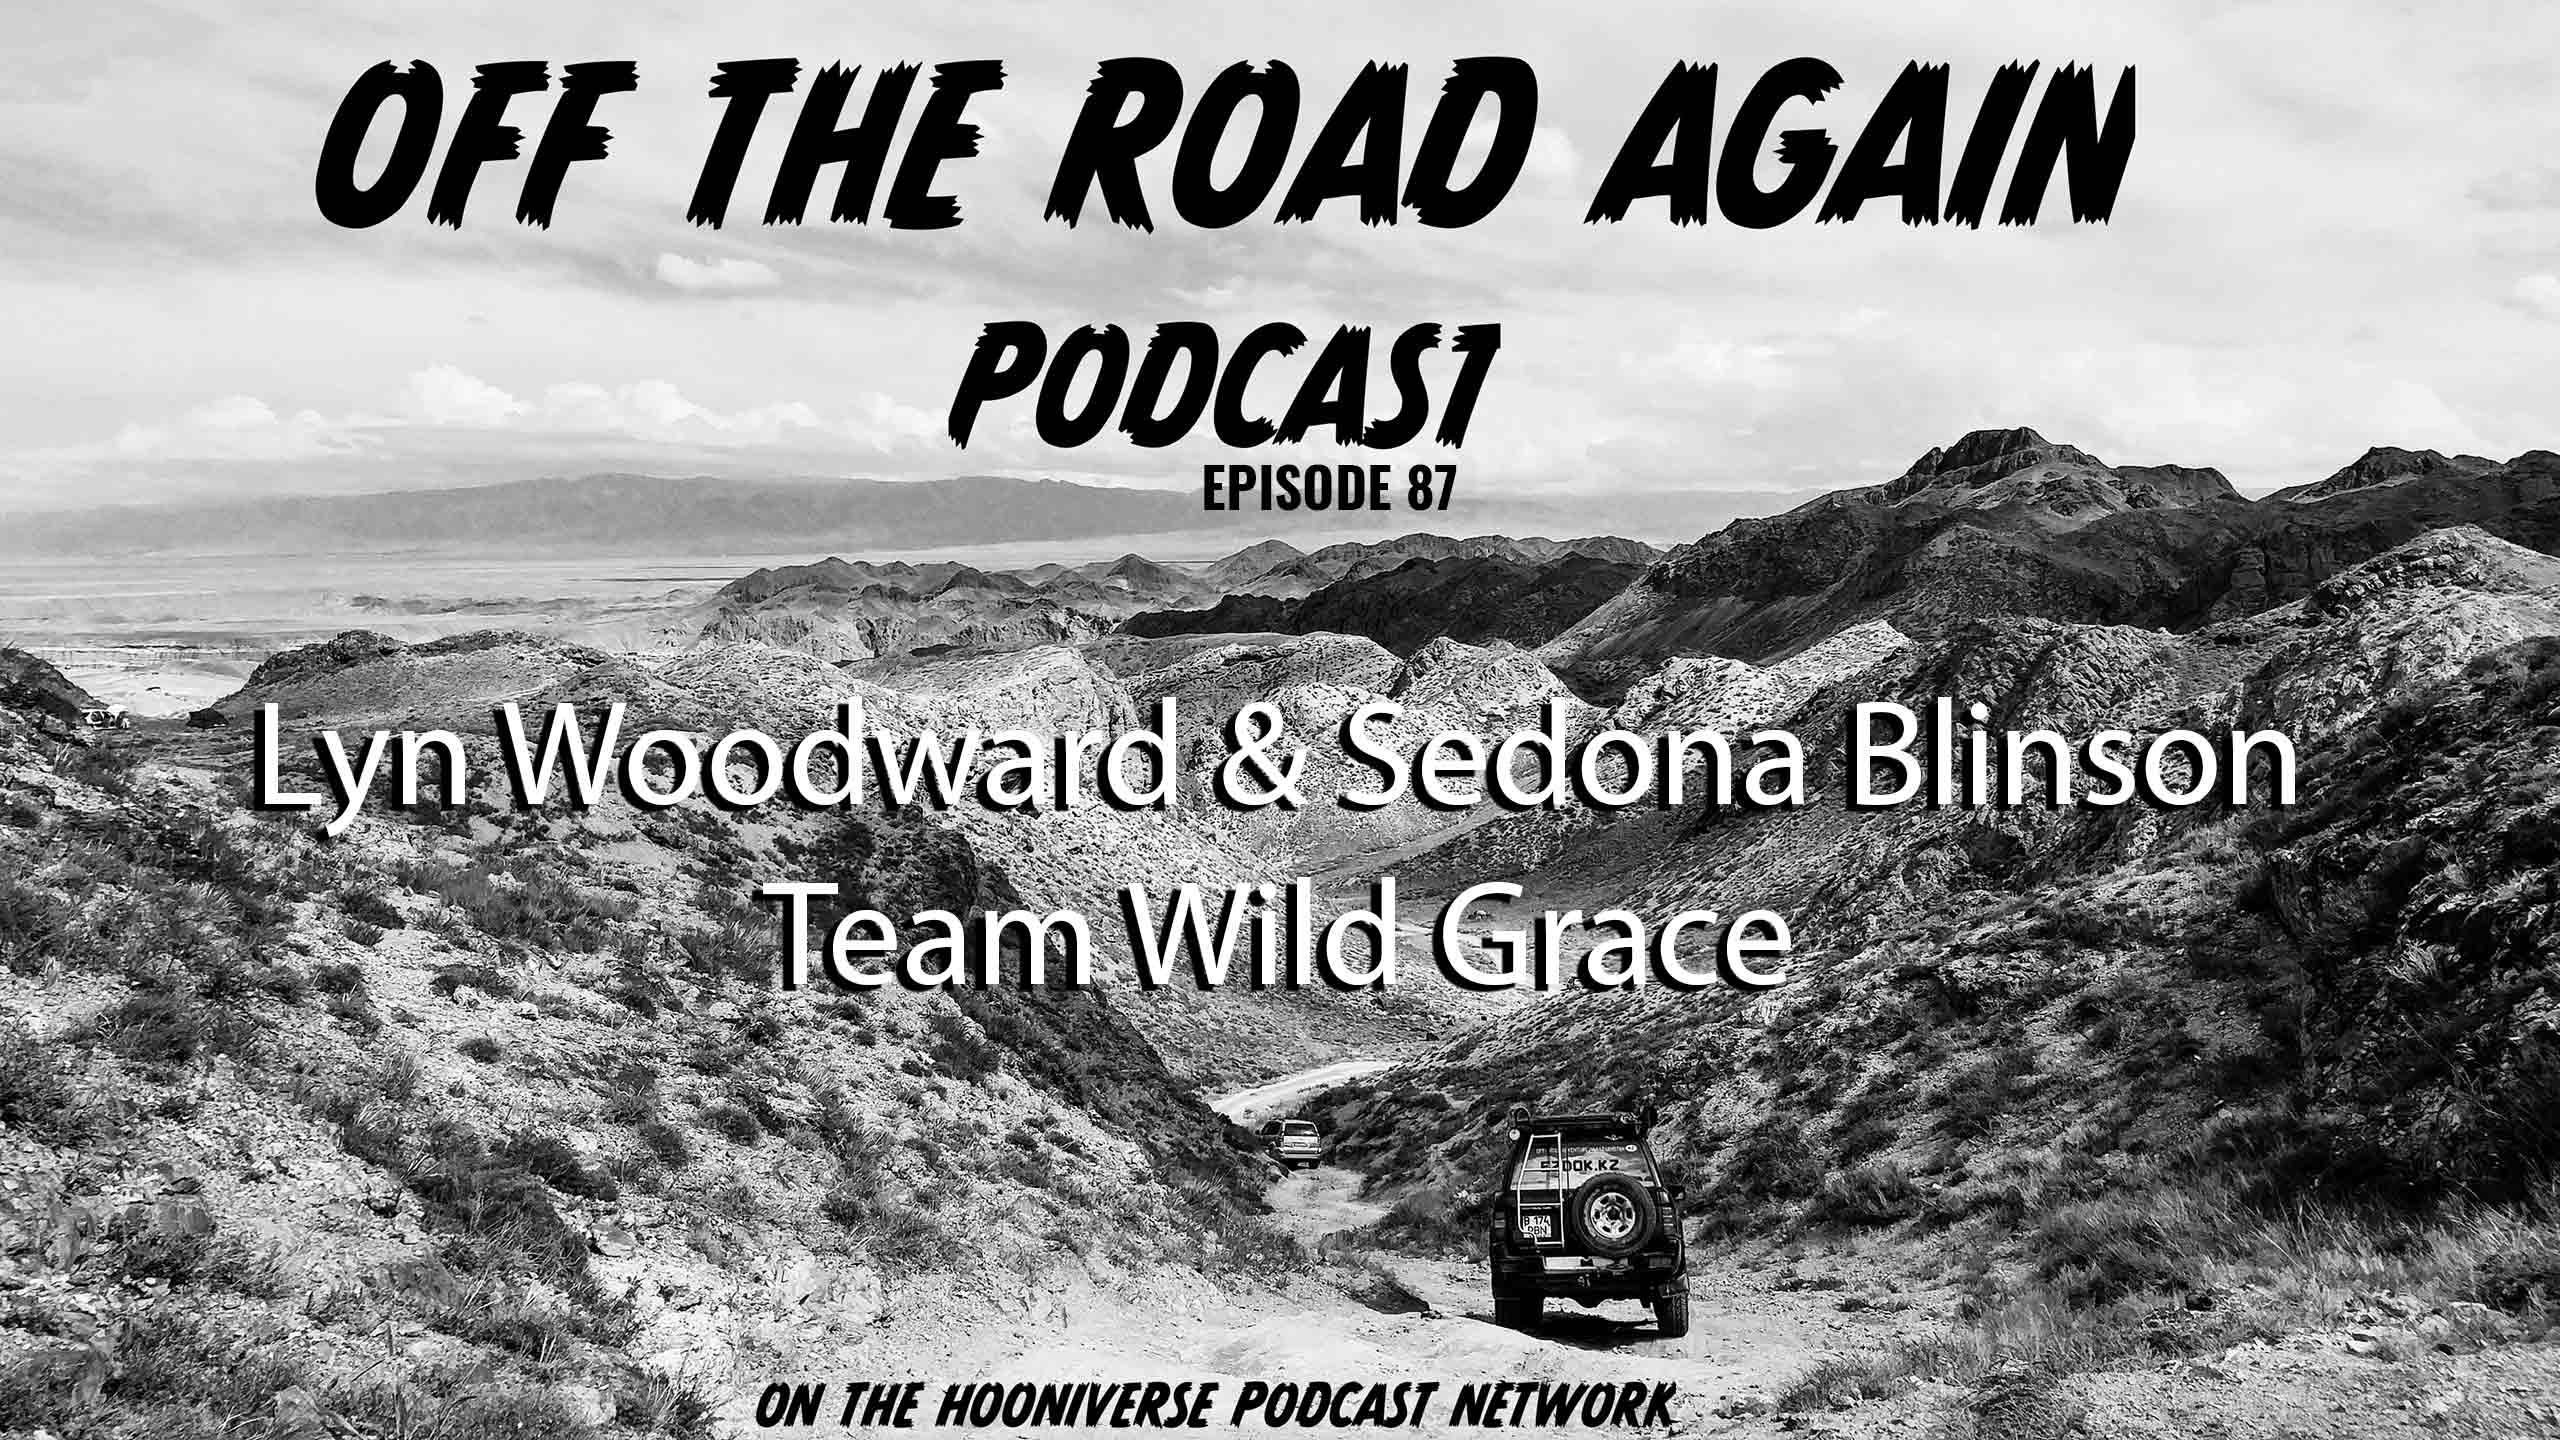 Lyn-Woodward-Sedona-Blinson-Off-The-Road-Again-Podcast-Episode-87